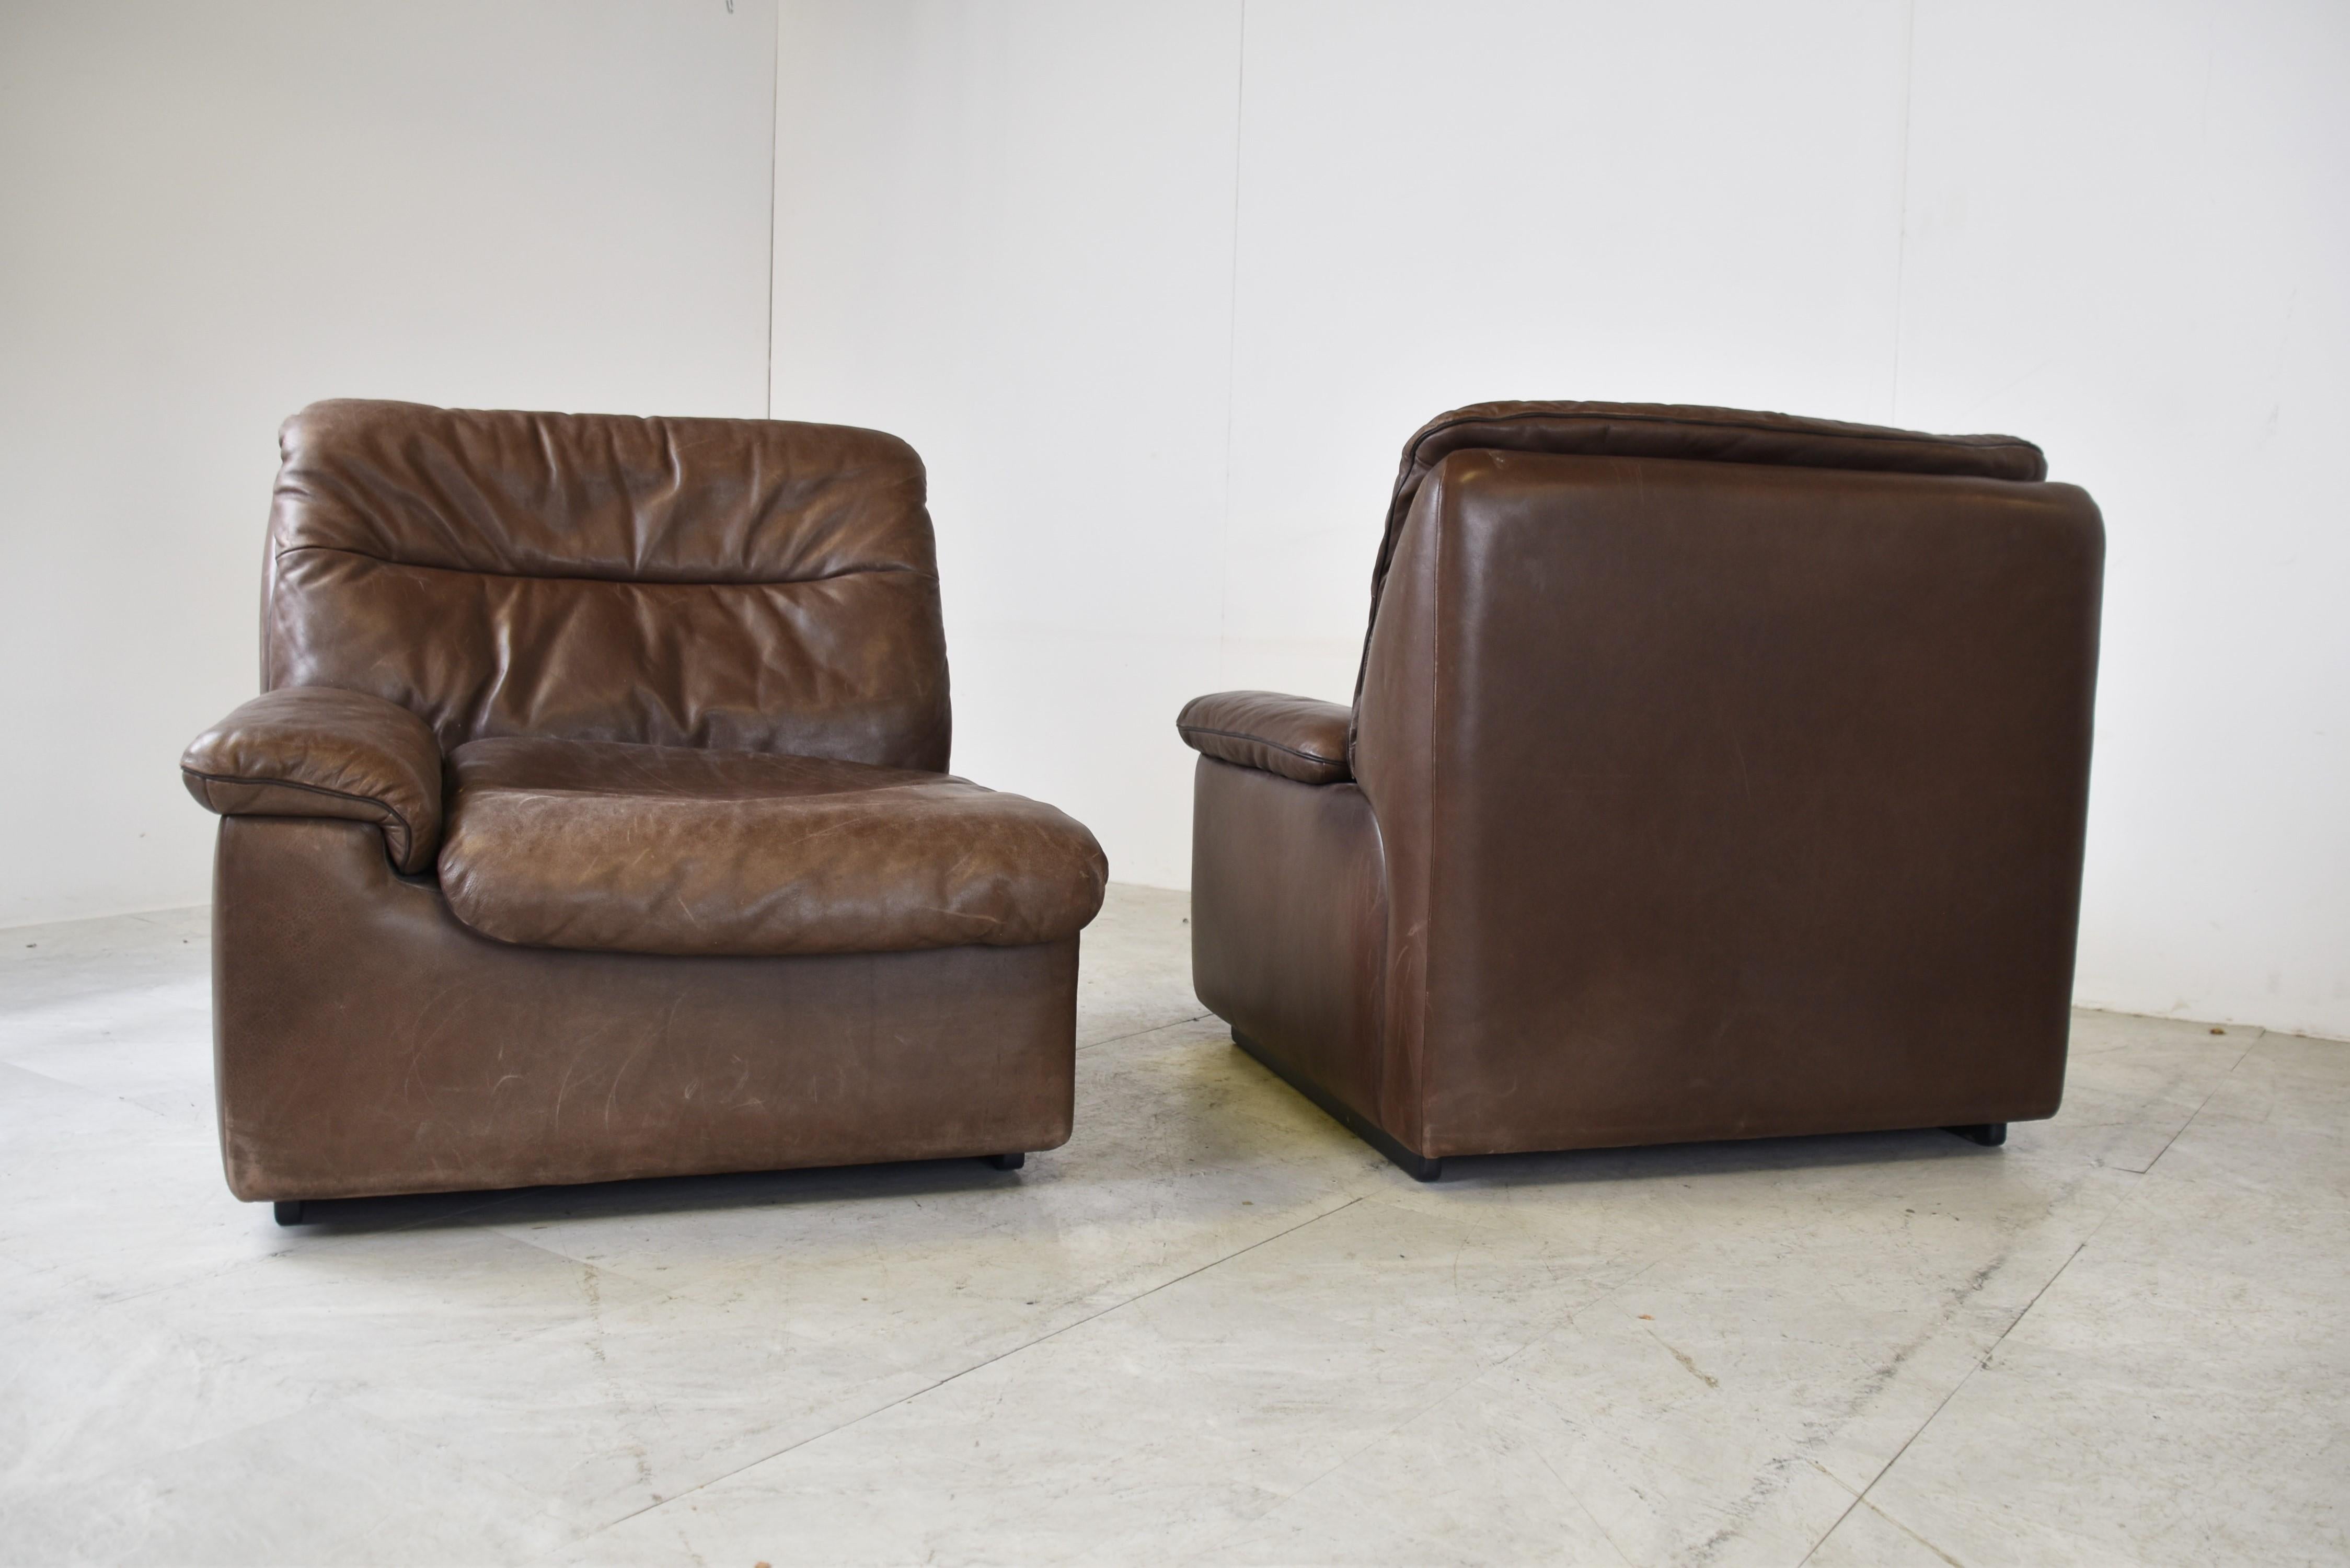 Mid century sofa set in brown leather by Desede.

The set consists of a three seater bench and a two seater bench.

Nice quality leather, as you would expect from Desede. 

Good original condition, with some lovely patina.

1970s -